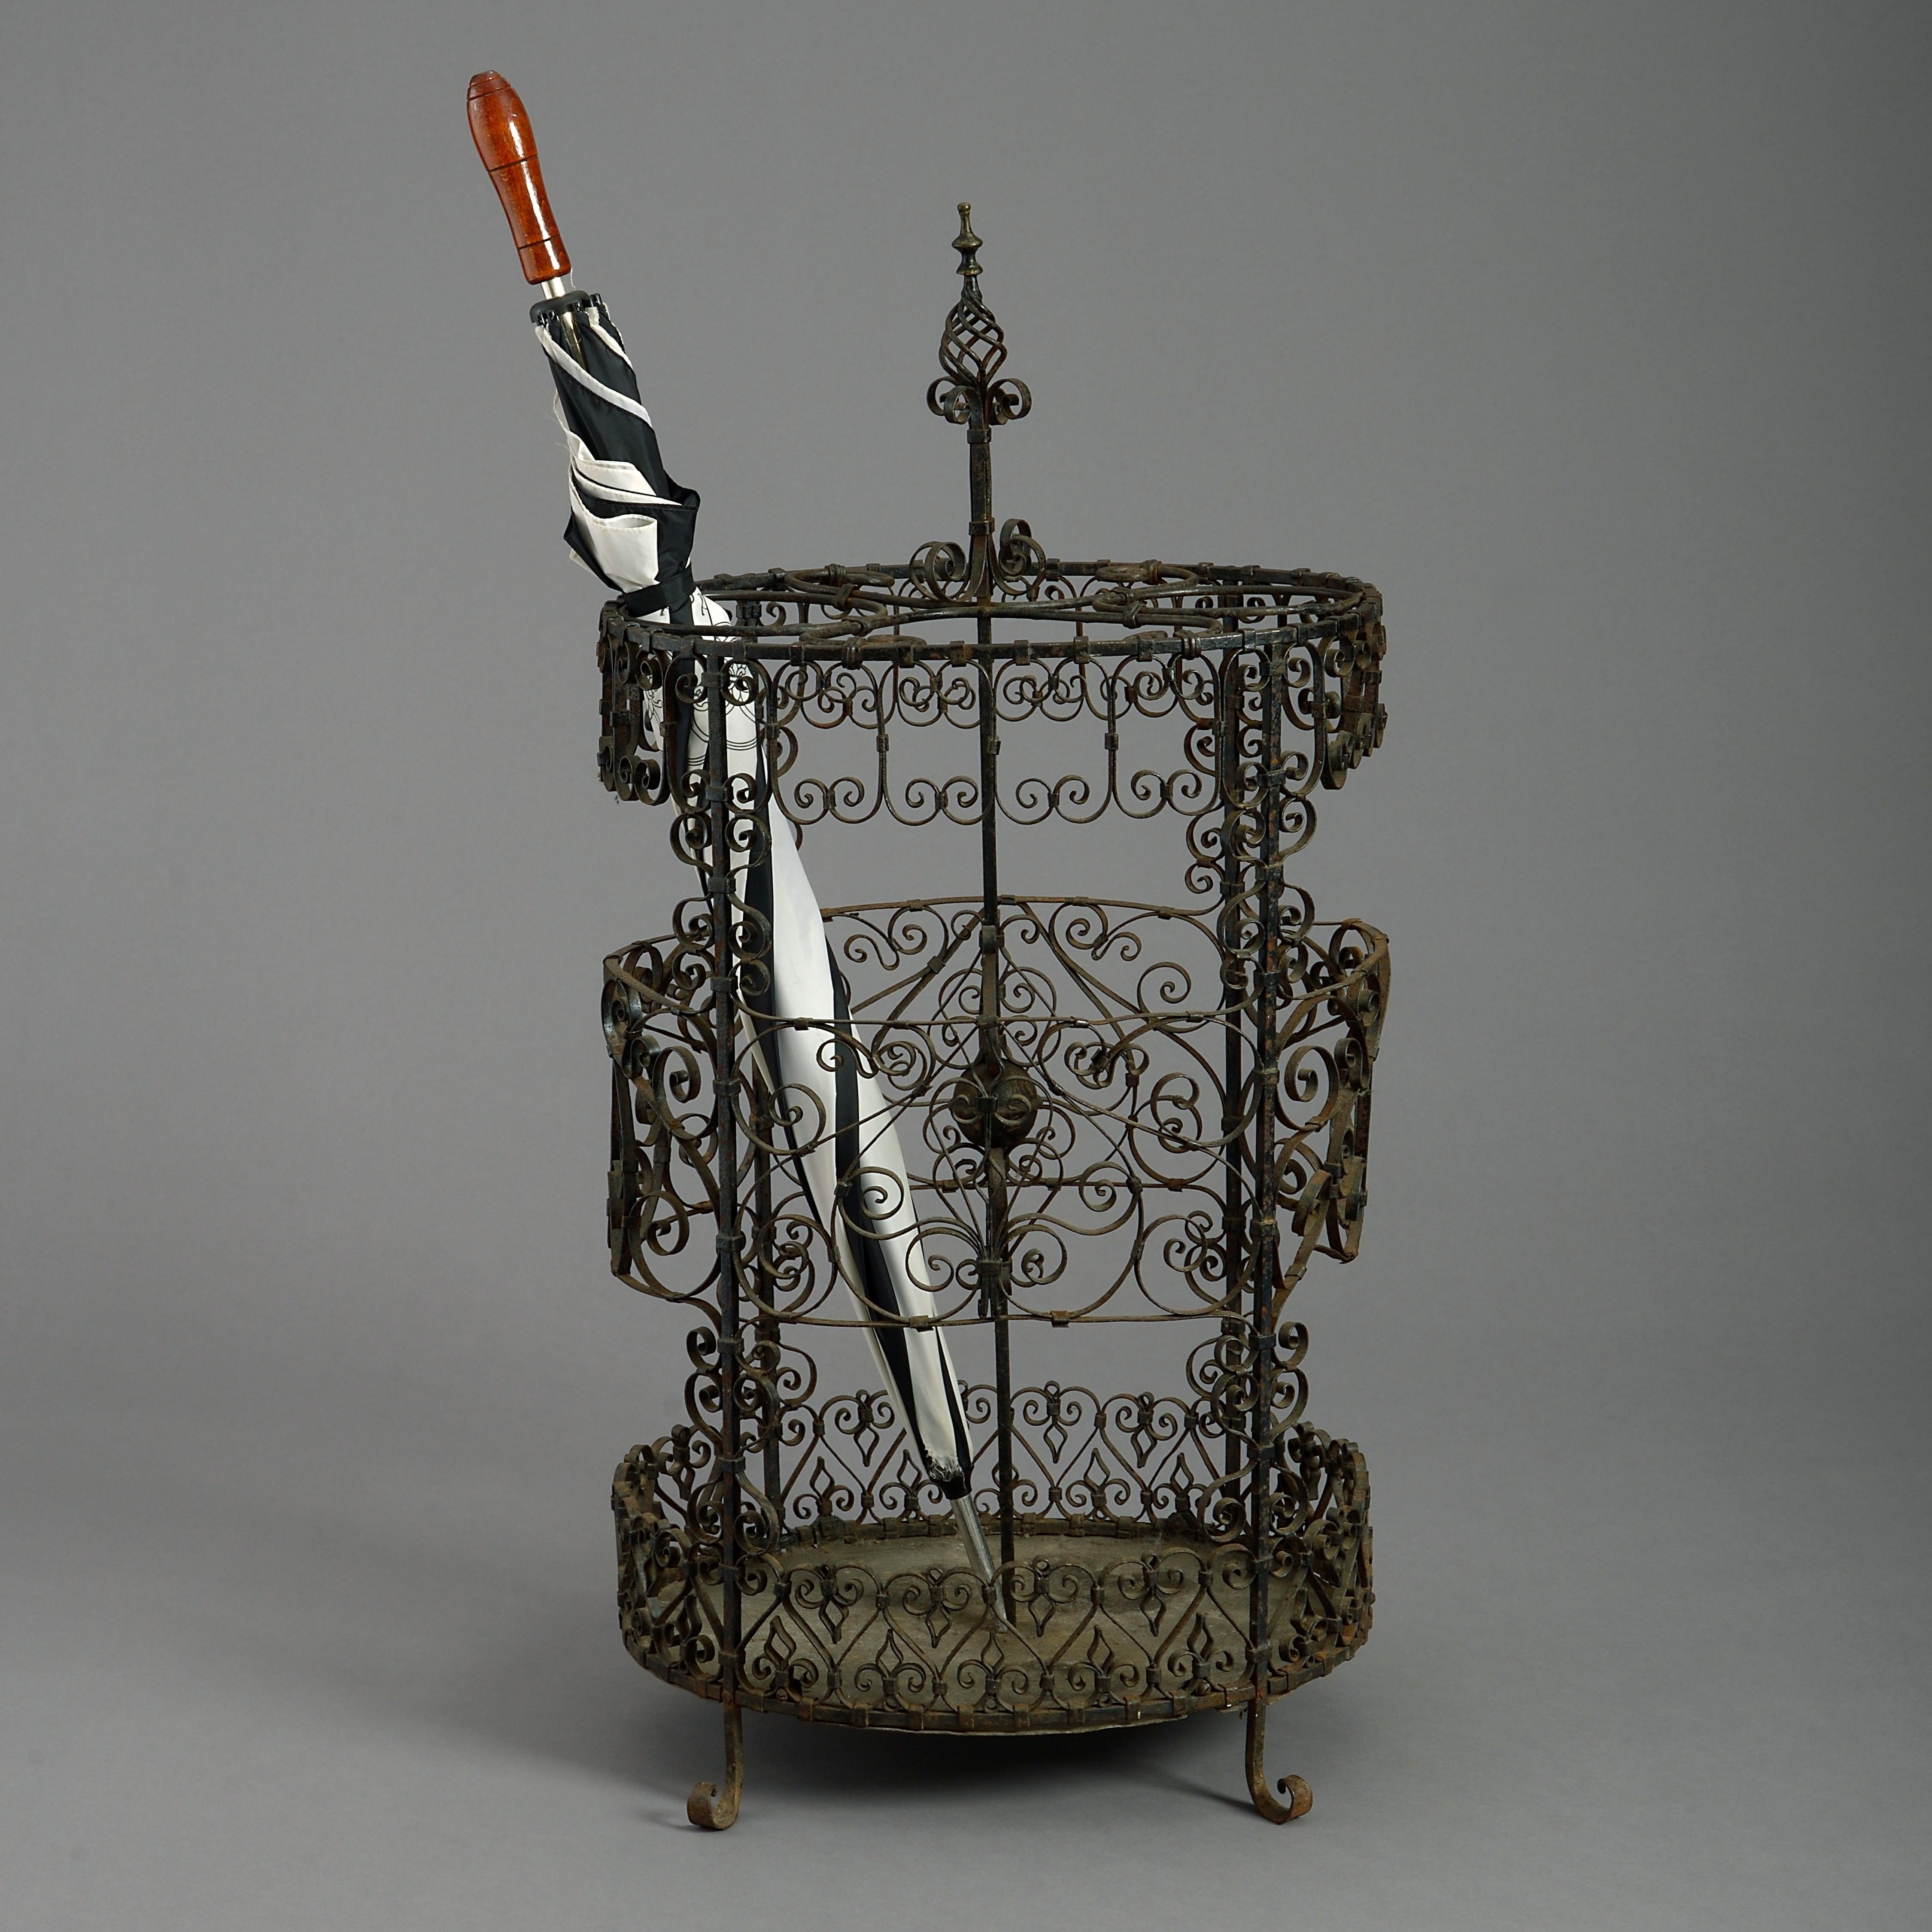 A rare and intricate mid-19th century wrought iron stick or umbrella stand, the central swirl finial support surrounded by a cage of elaborate scrollwork, all raised on four scrolling feet.